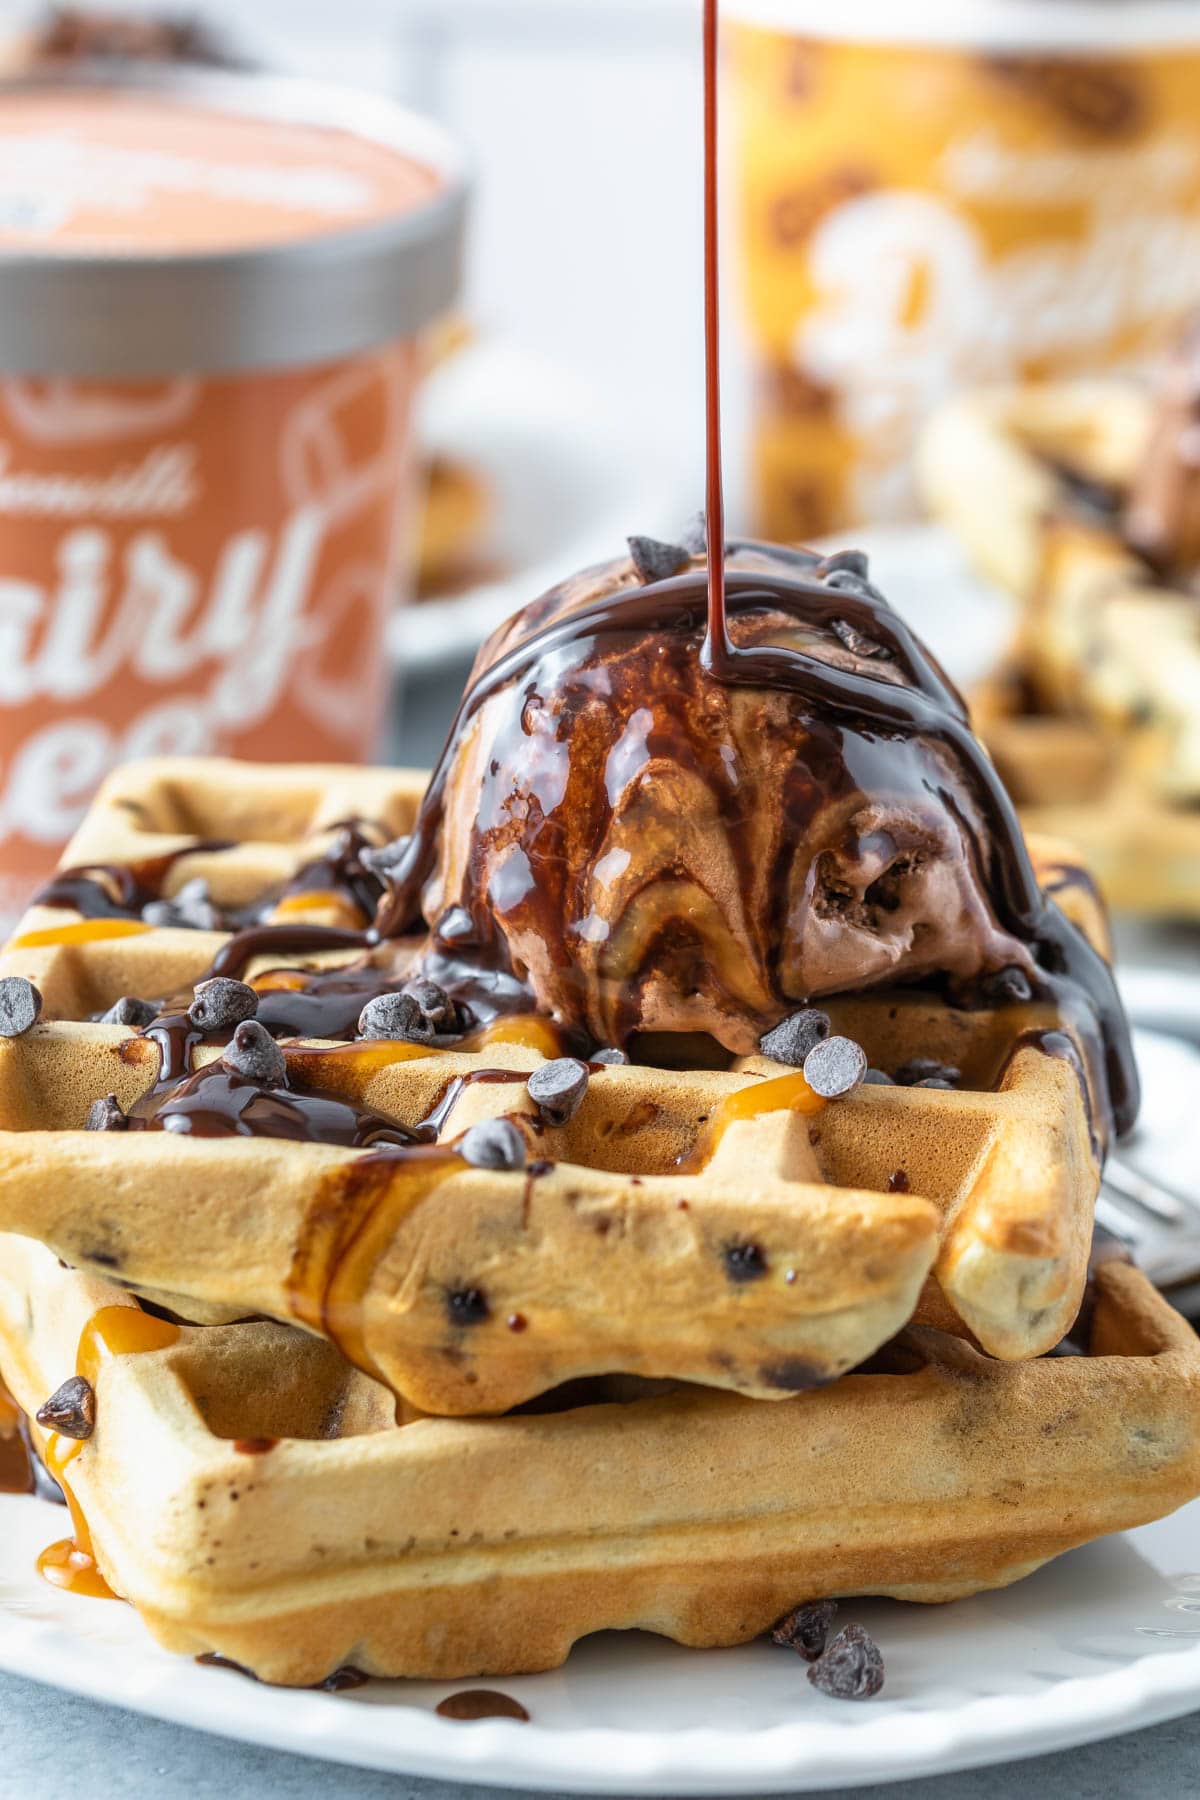 Topping chocolate chip waffles with ice cream and chocolate syrup